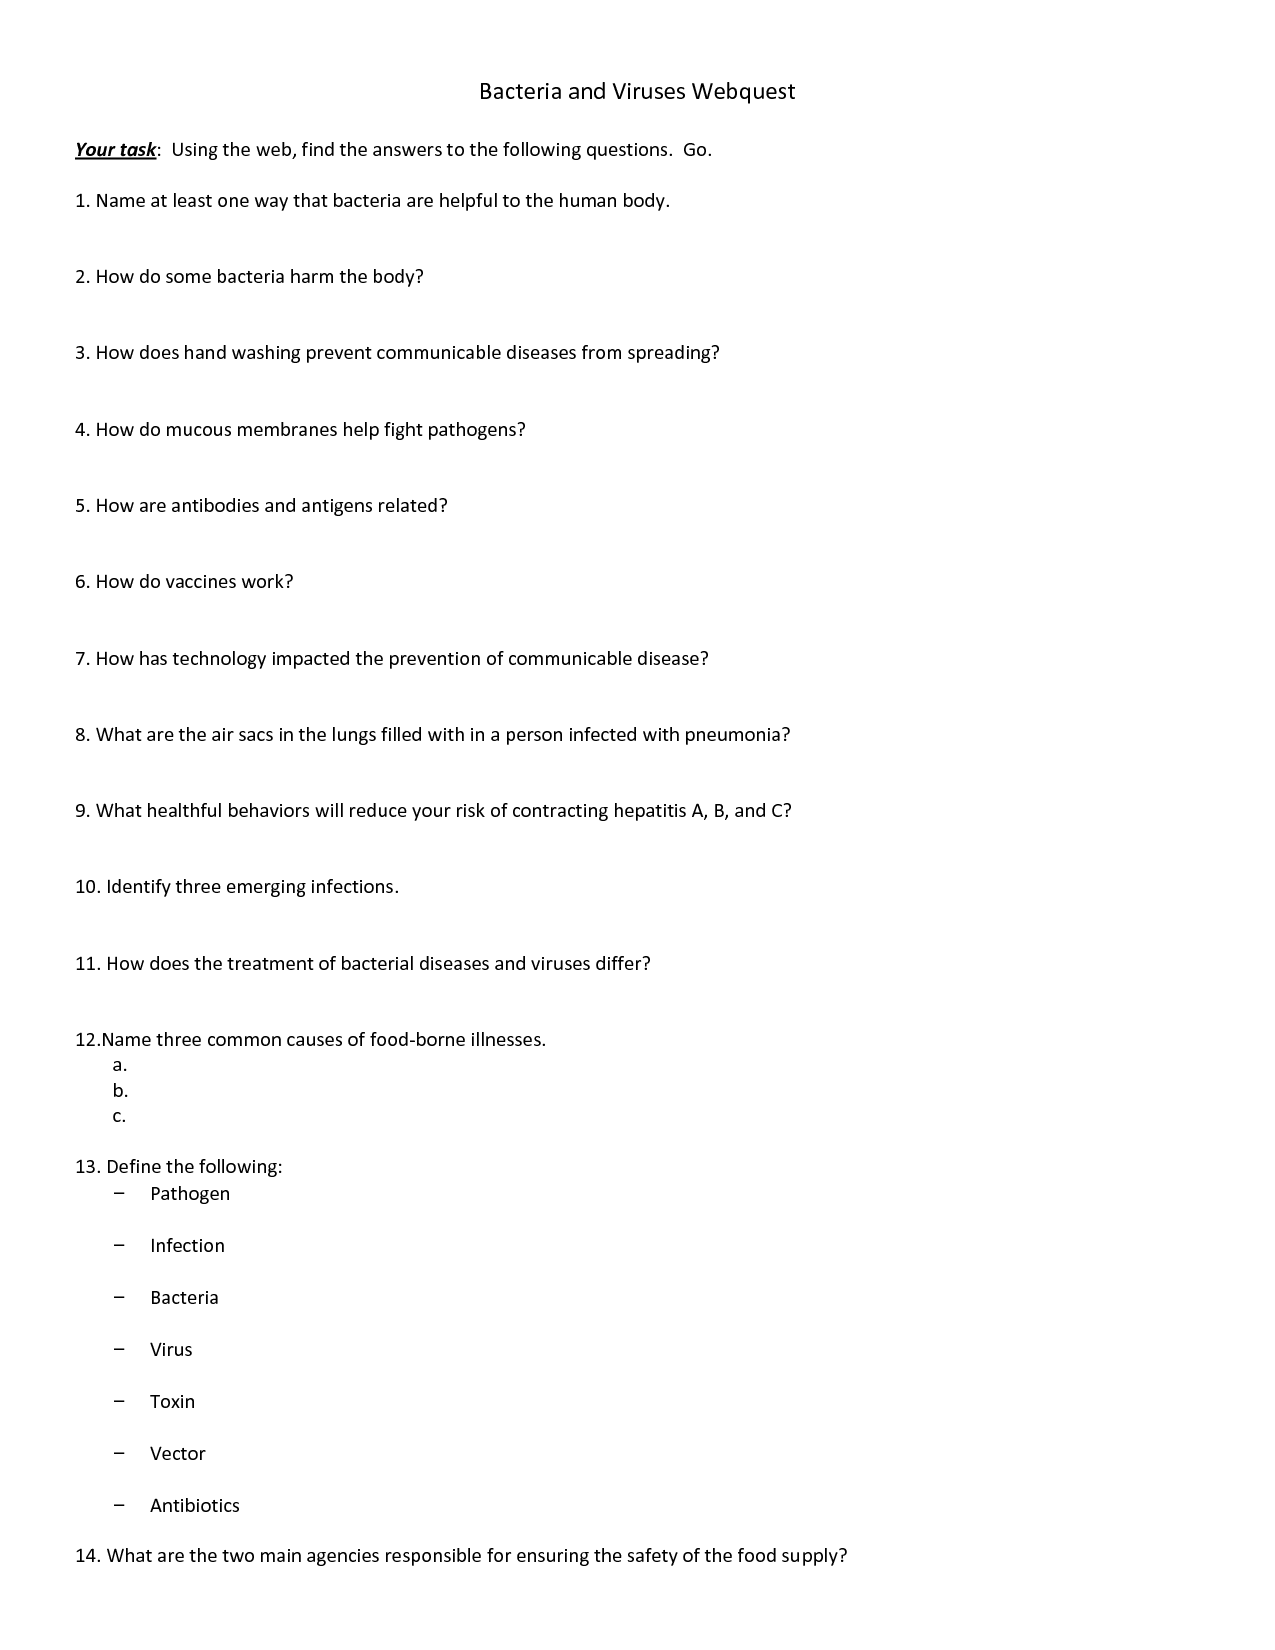 14-best-images-of-viruses-and-bacteria-worksheets-bacteria-and-viruses-worksheet-answers